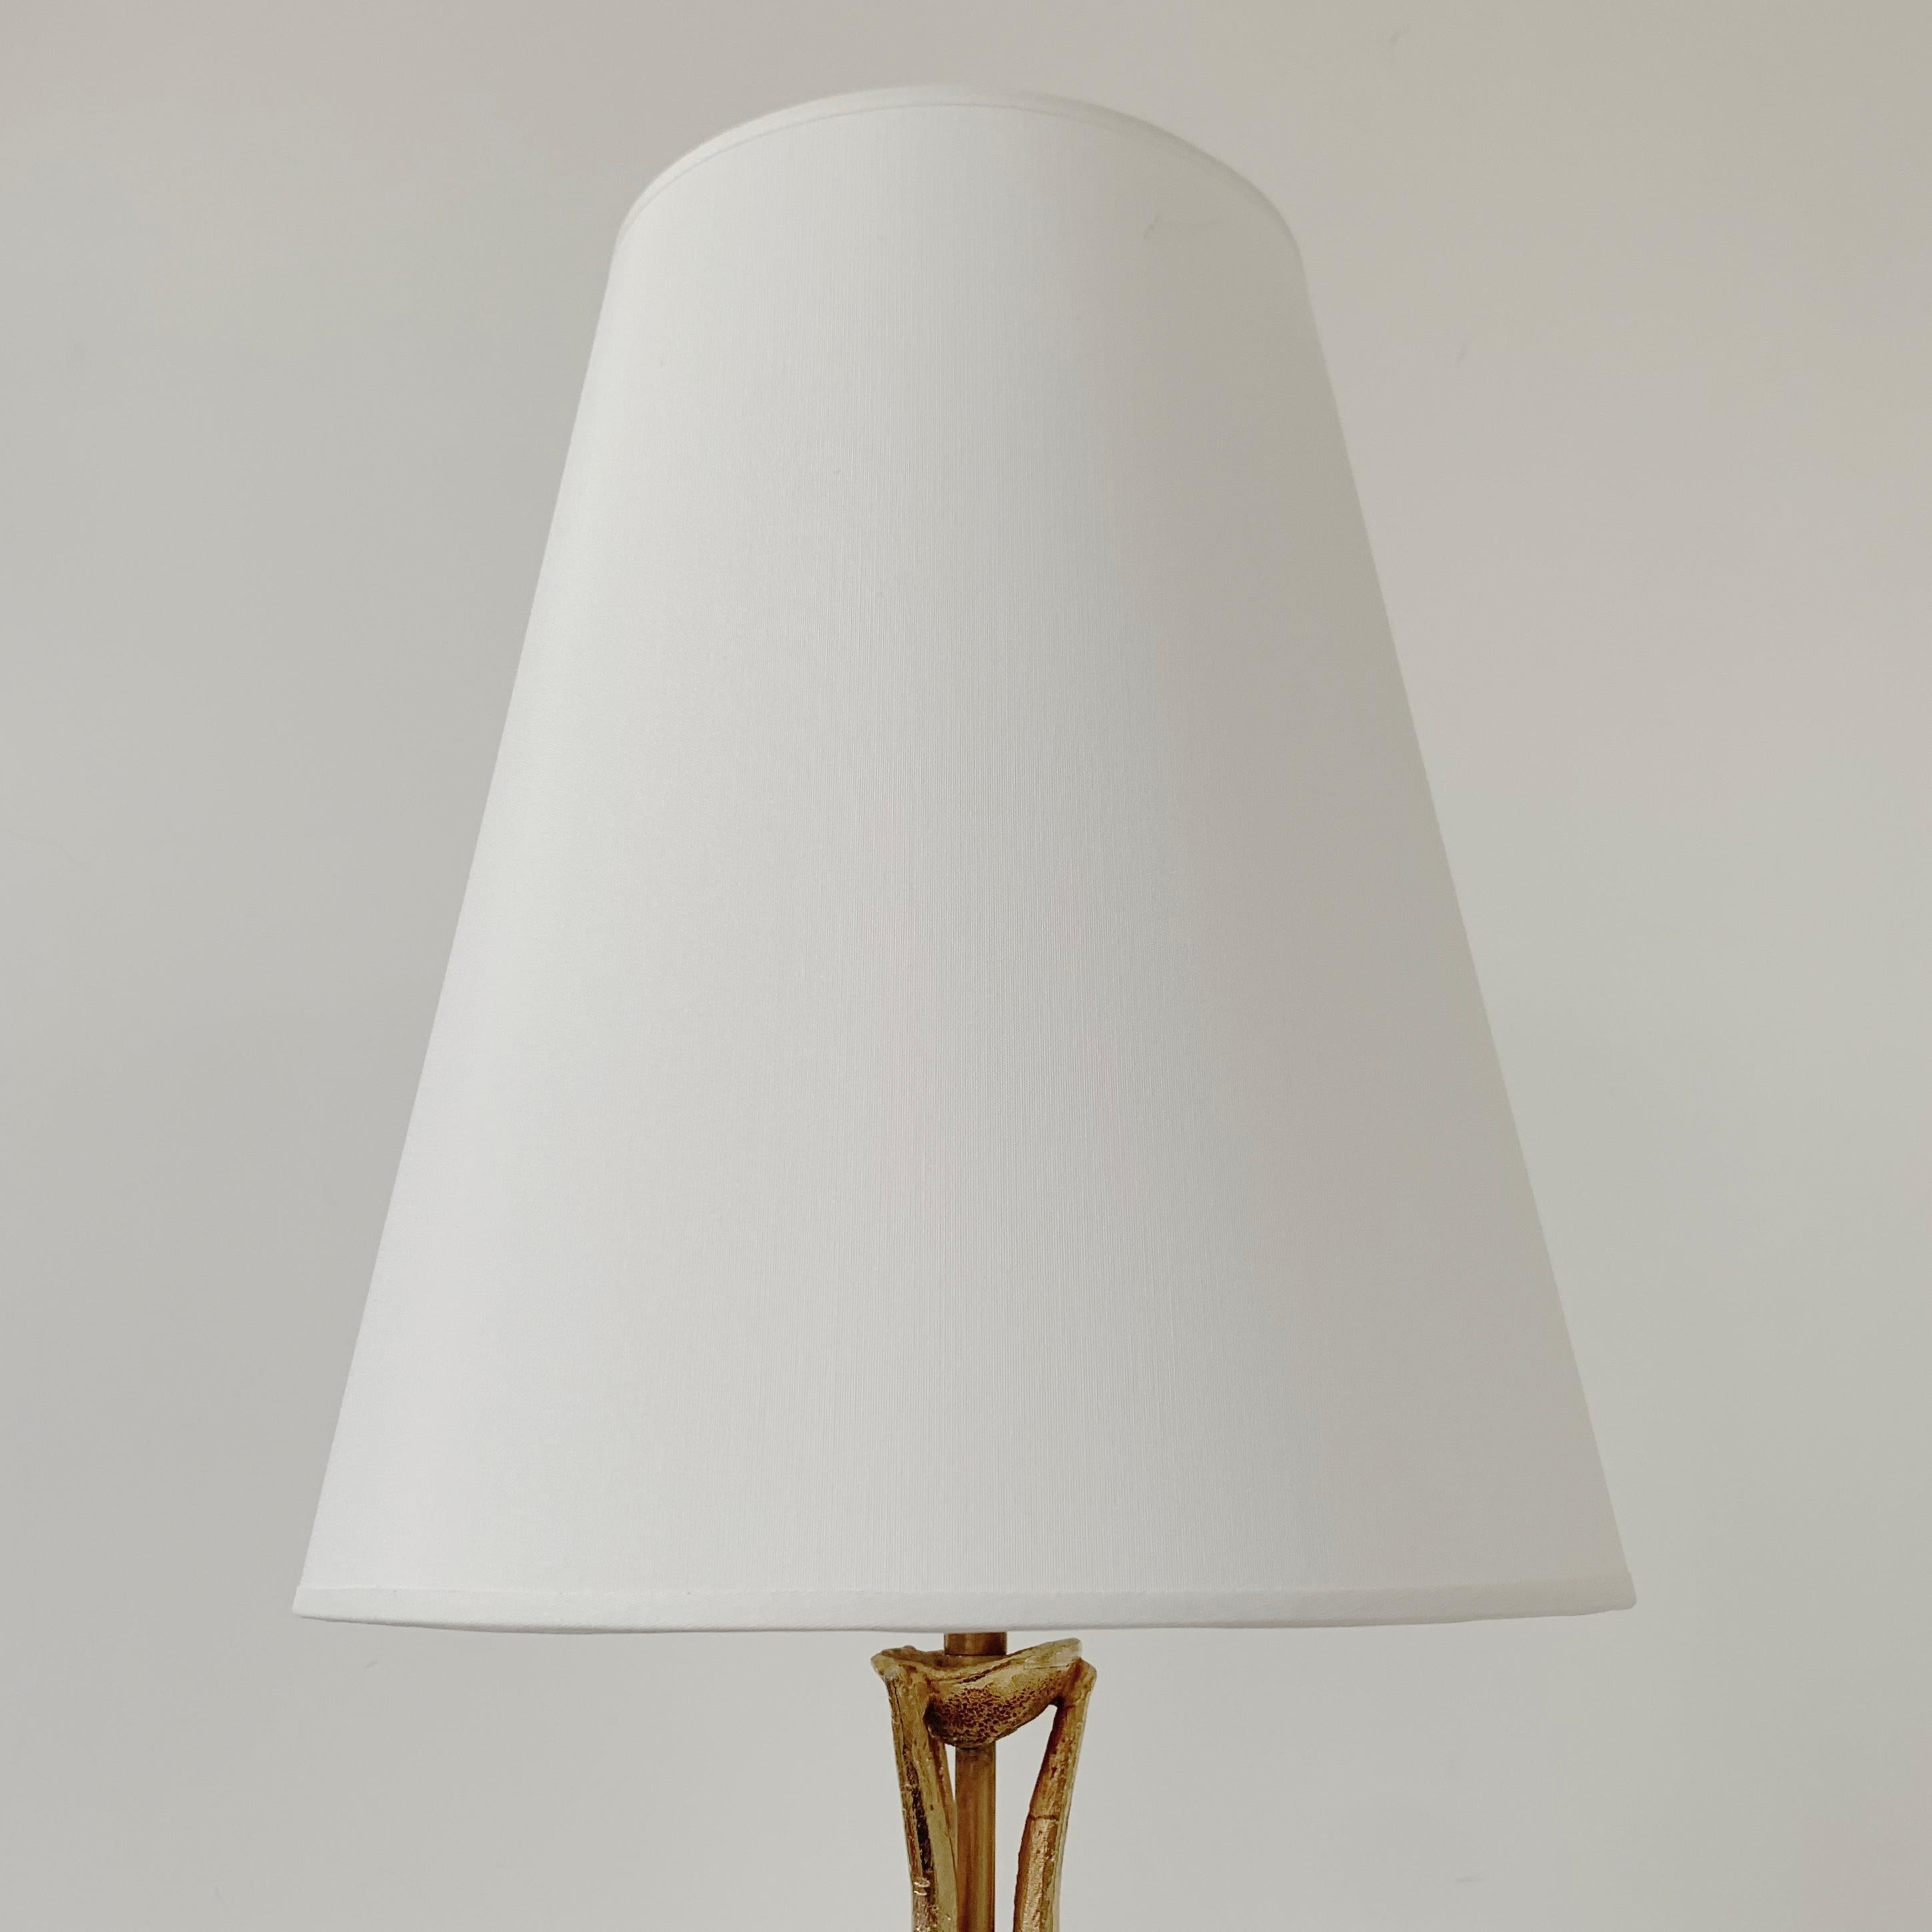 Bronze Table Lamp by Pierre Casenove for Fondica, Stamped, circa 1990, France For Sale 4